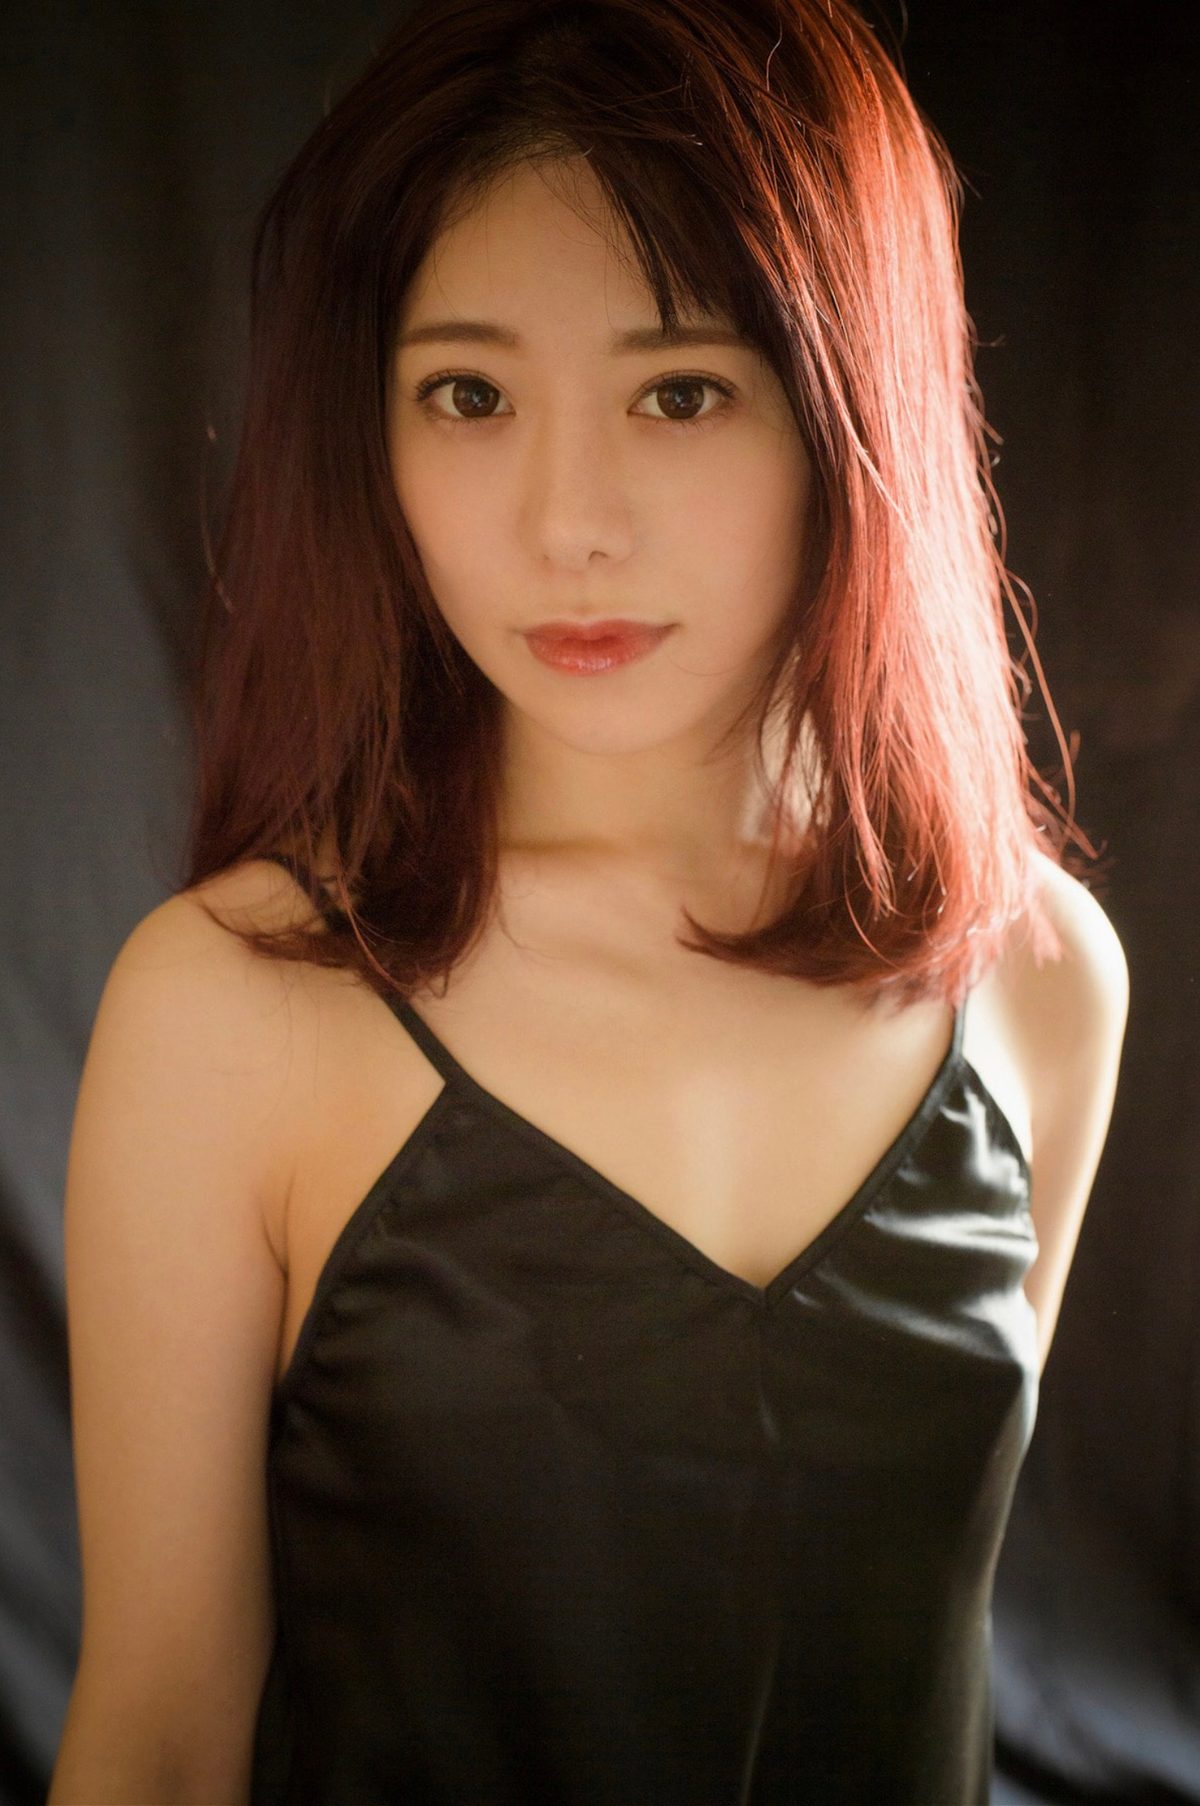 Nozomi Arimura 有村のぞみ Hair Nude Photo Collection As It Is 0032 8772328162.jpg